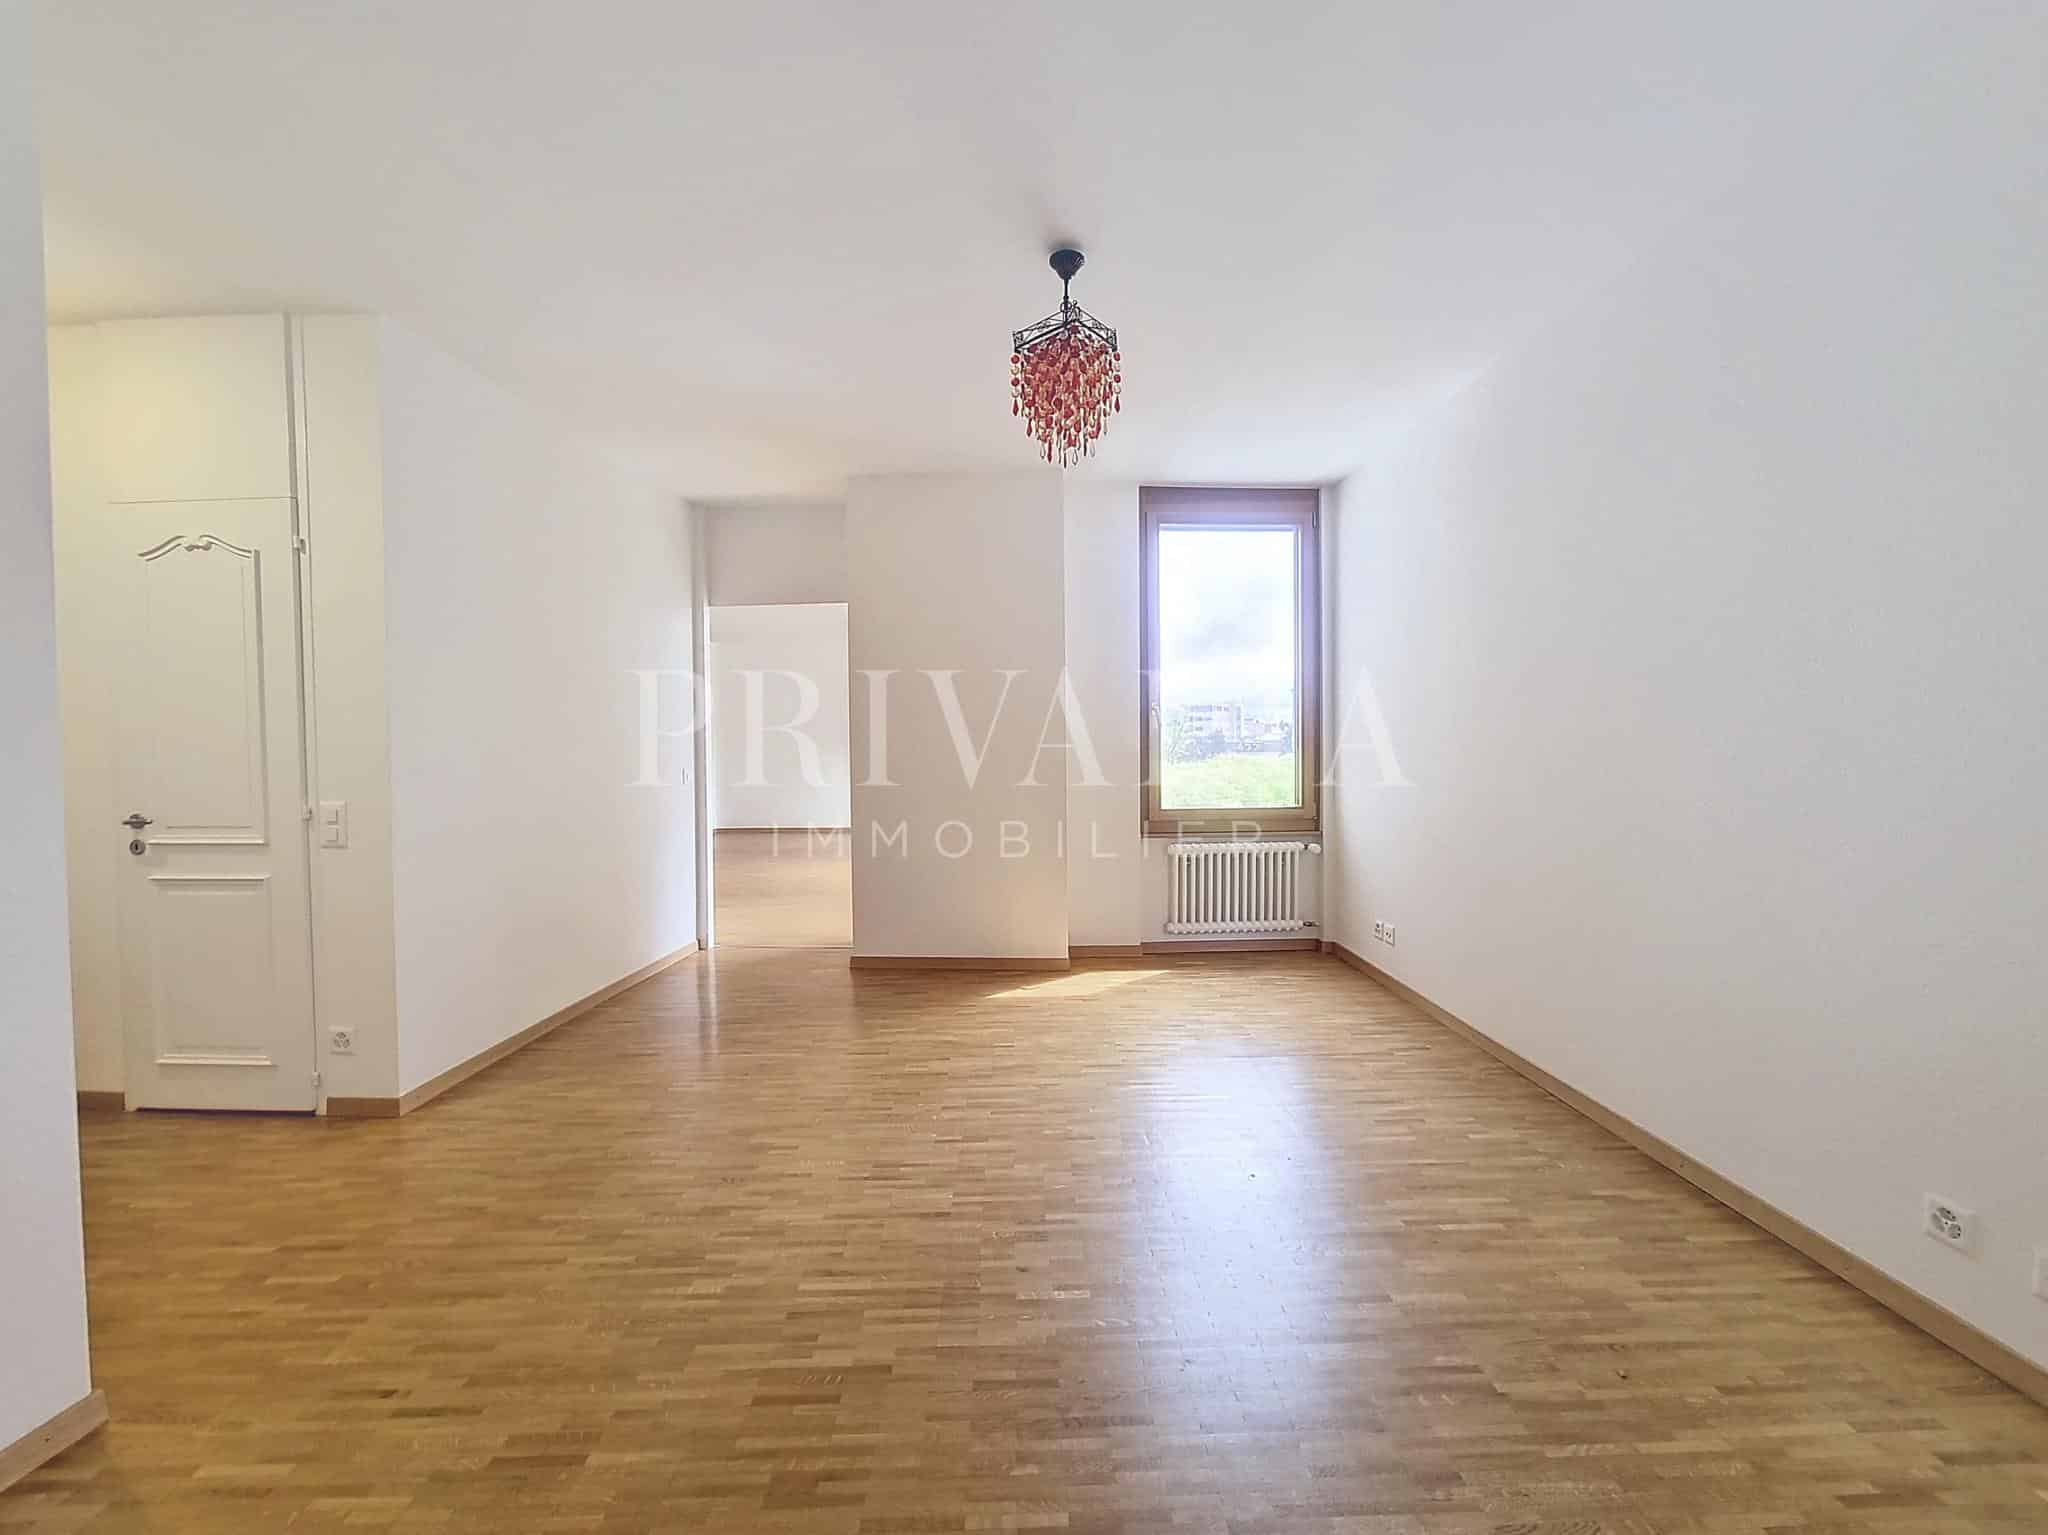 PrivaliaSuperb spacious apartment in the heart of the old town